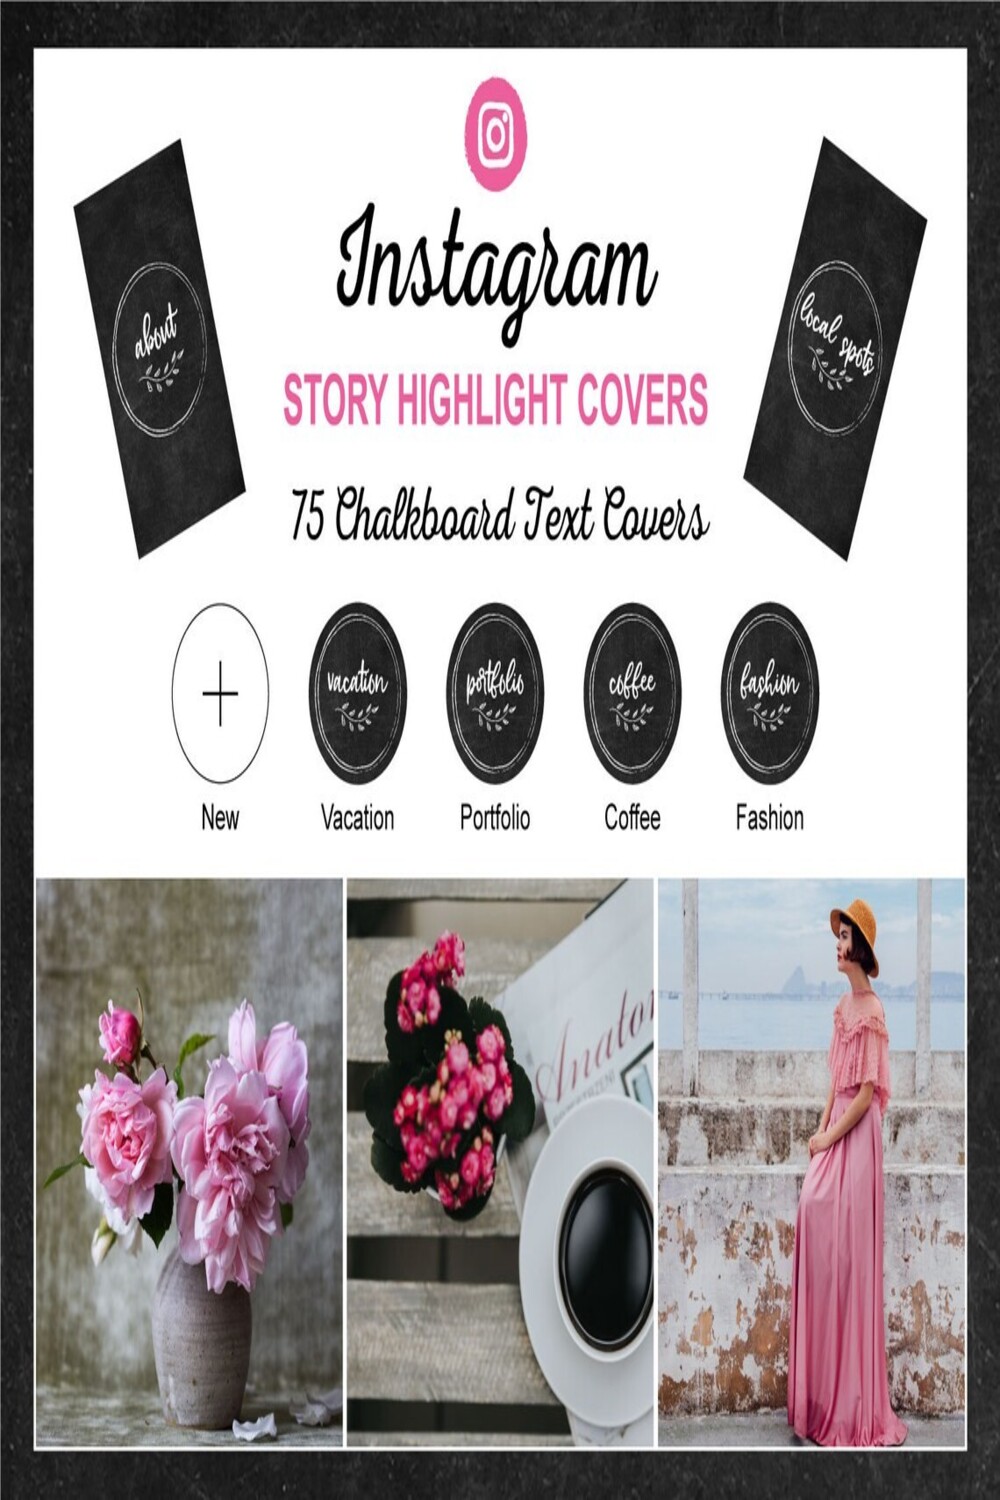 75 Instagram Story Highlight ChalkBoard Text Covers pinterest image.